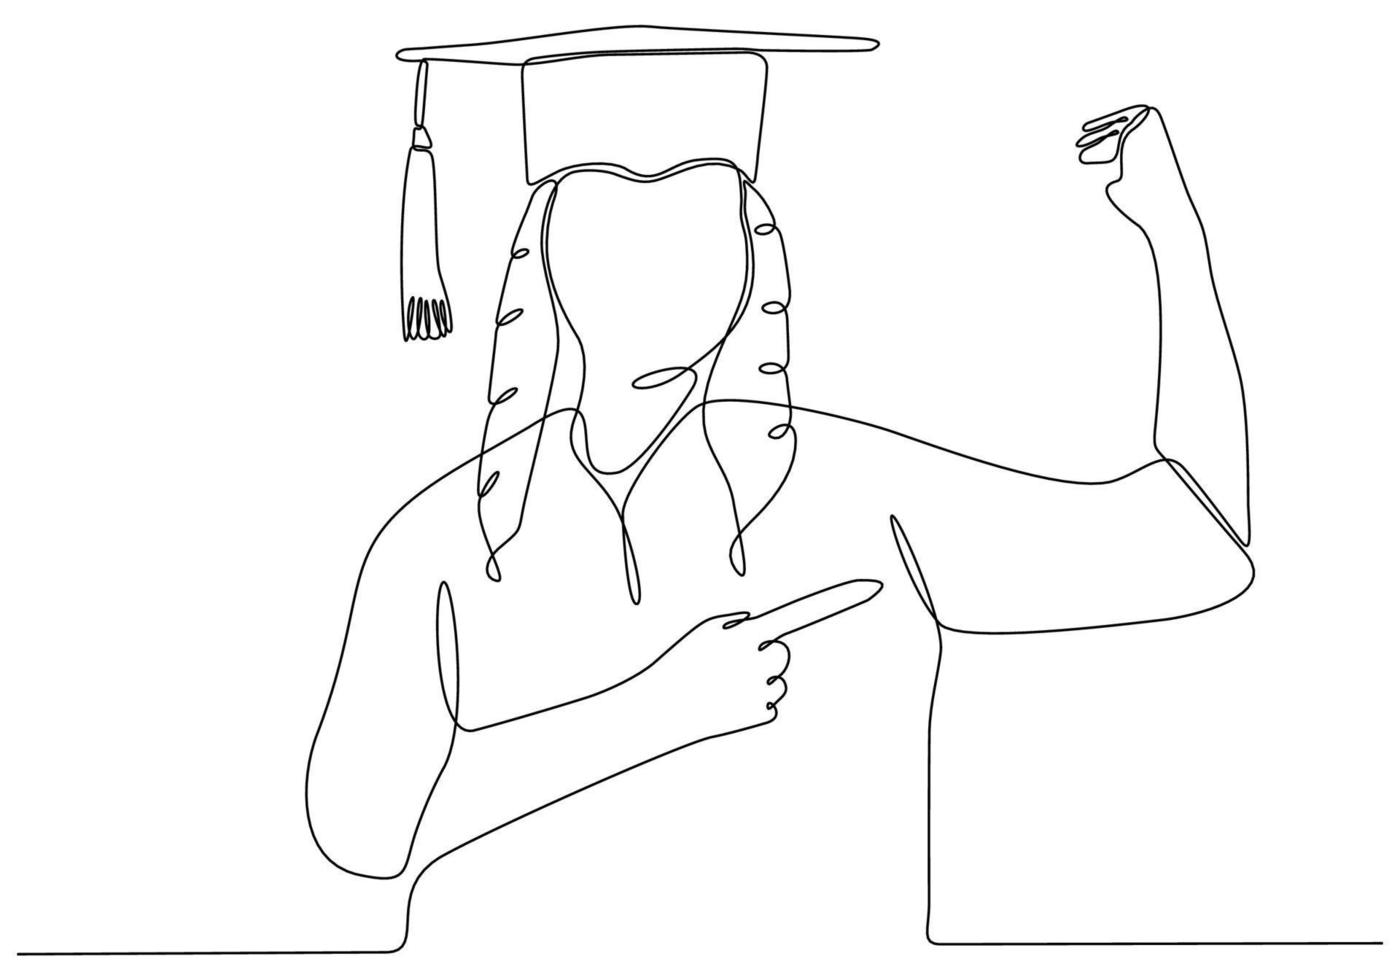 continuous single drawn one line girl student drawn by hand picture silhouette. Line art. graduate student graduate vector